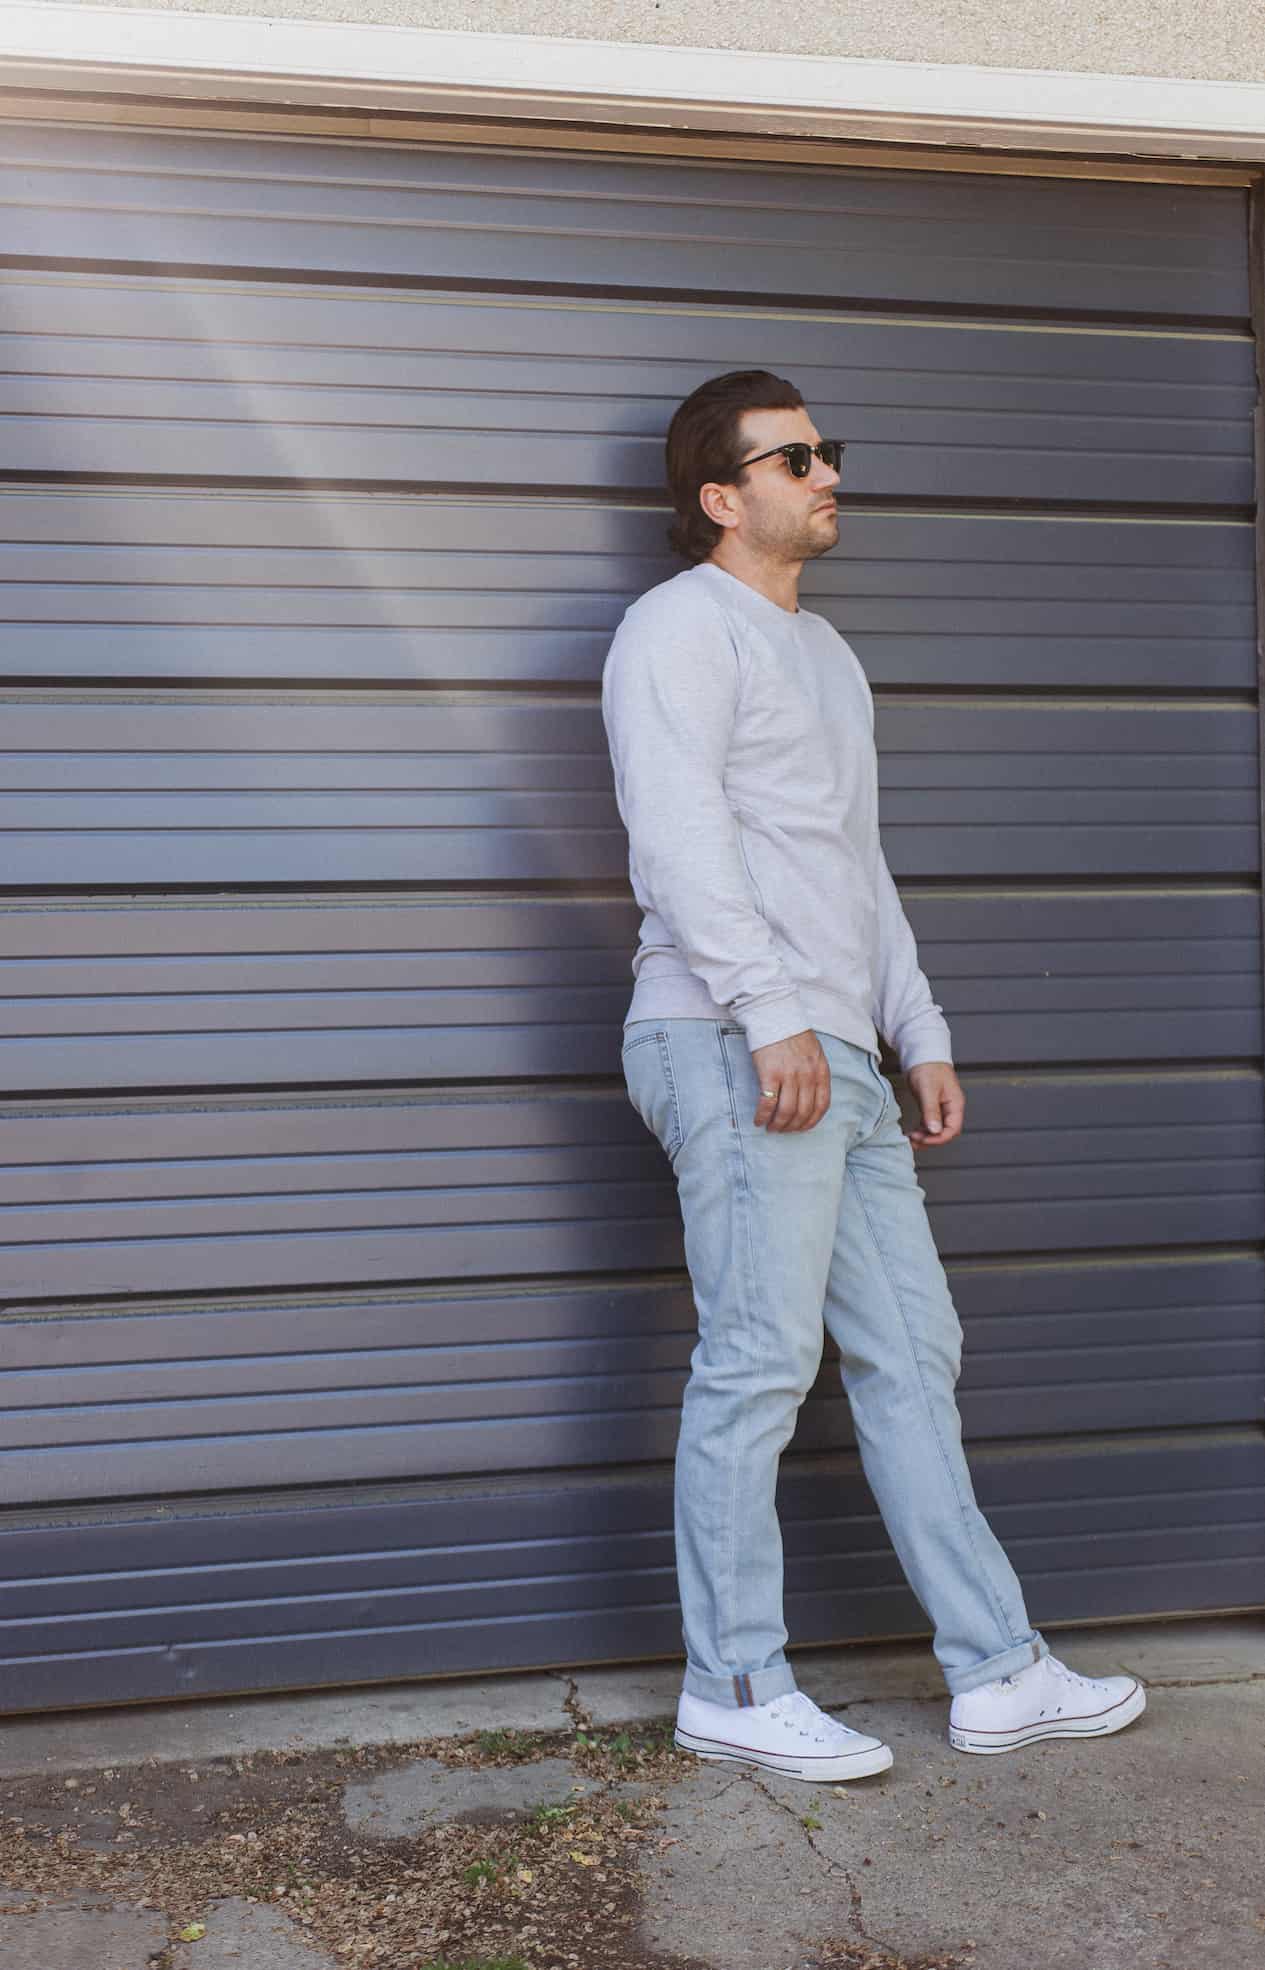 image of a man with brown hair standing against a dark blue garage door wearing a grey sweater, light blue jeans, and white sneakers